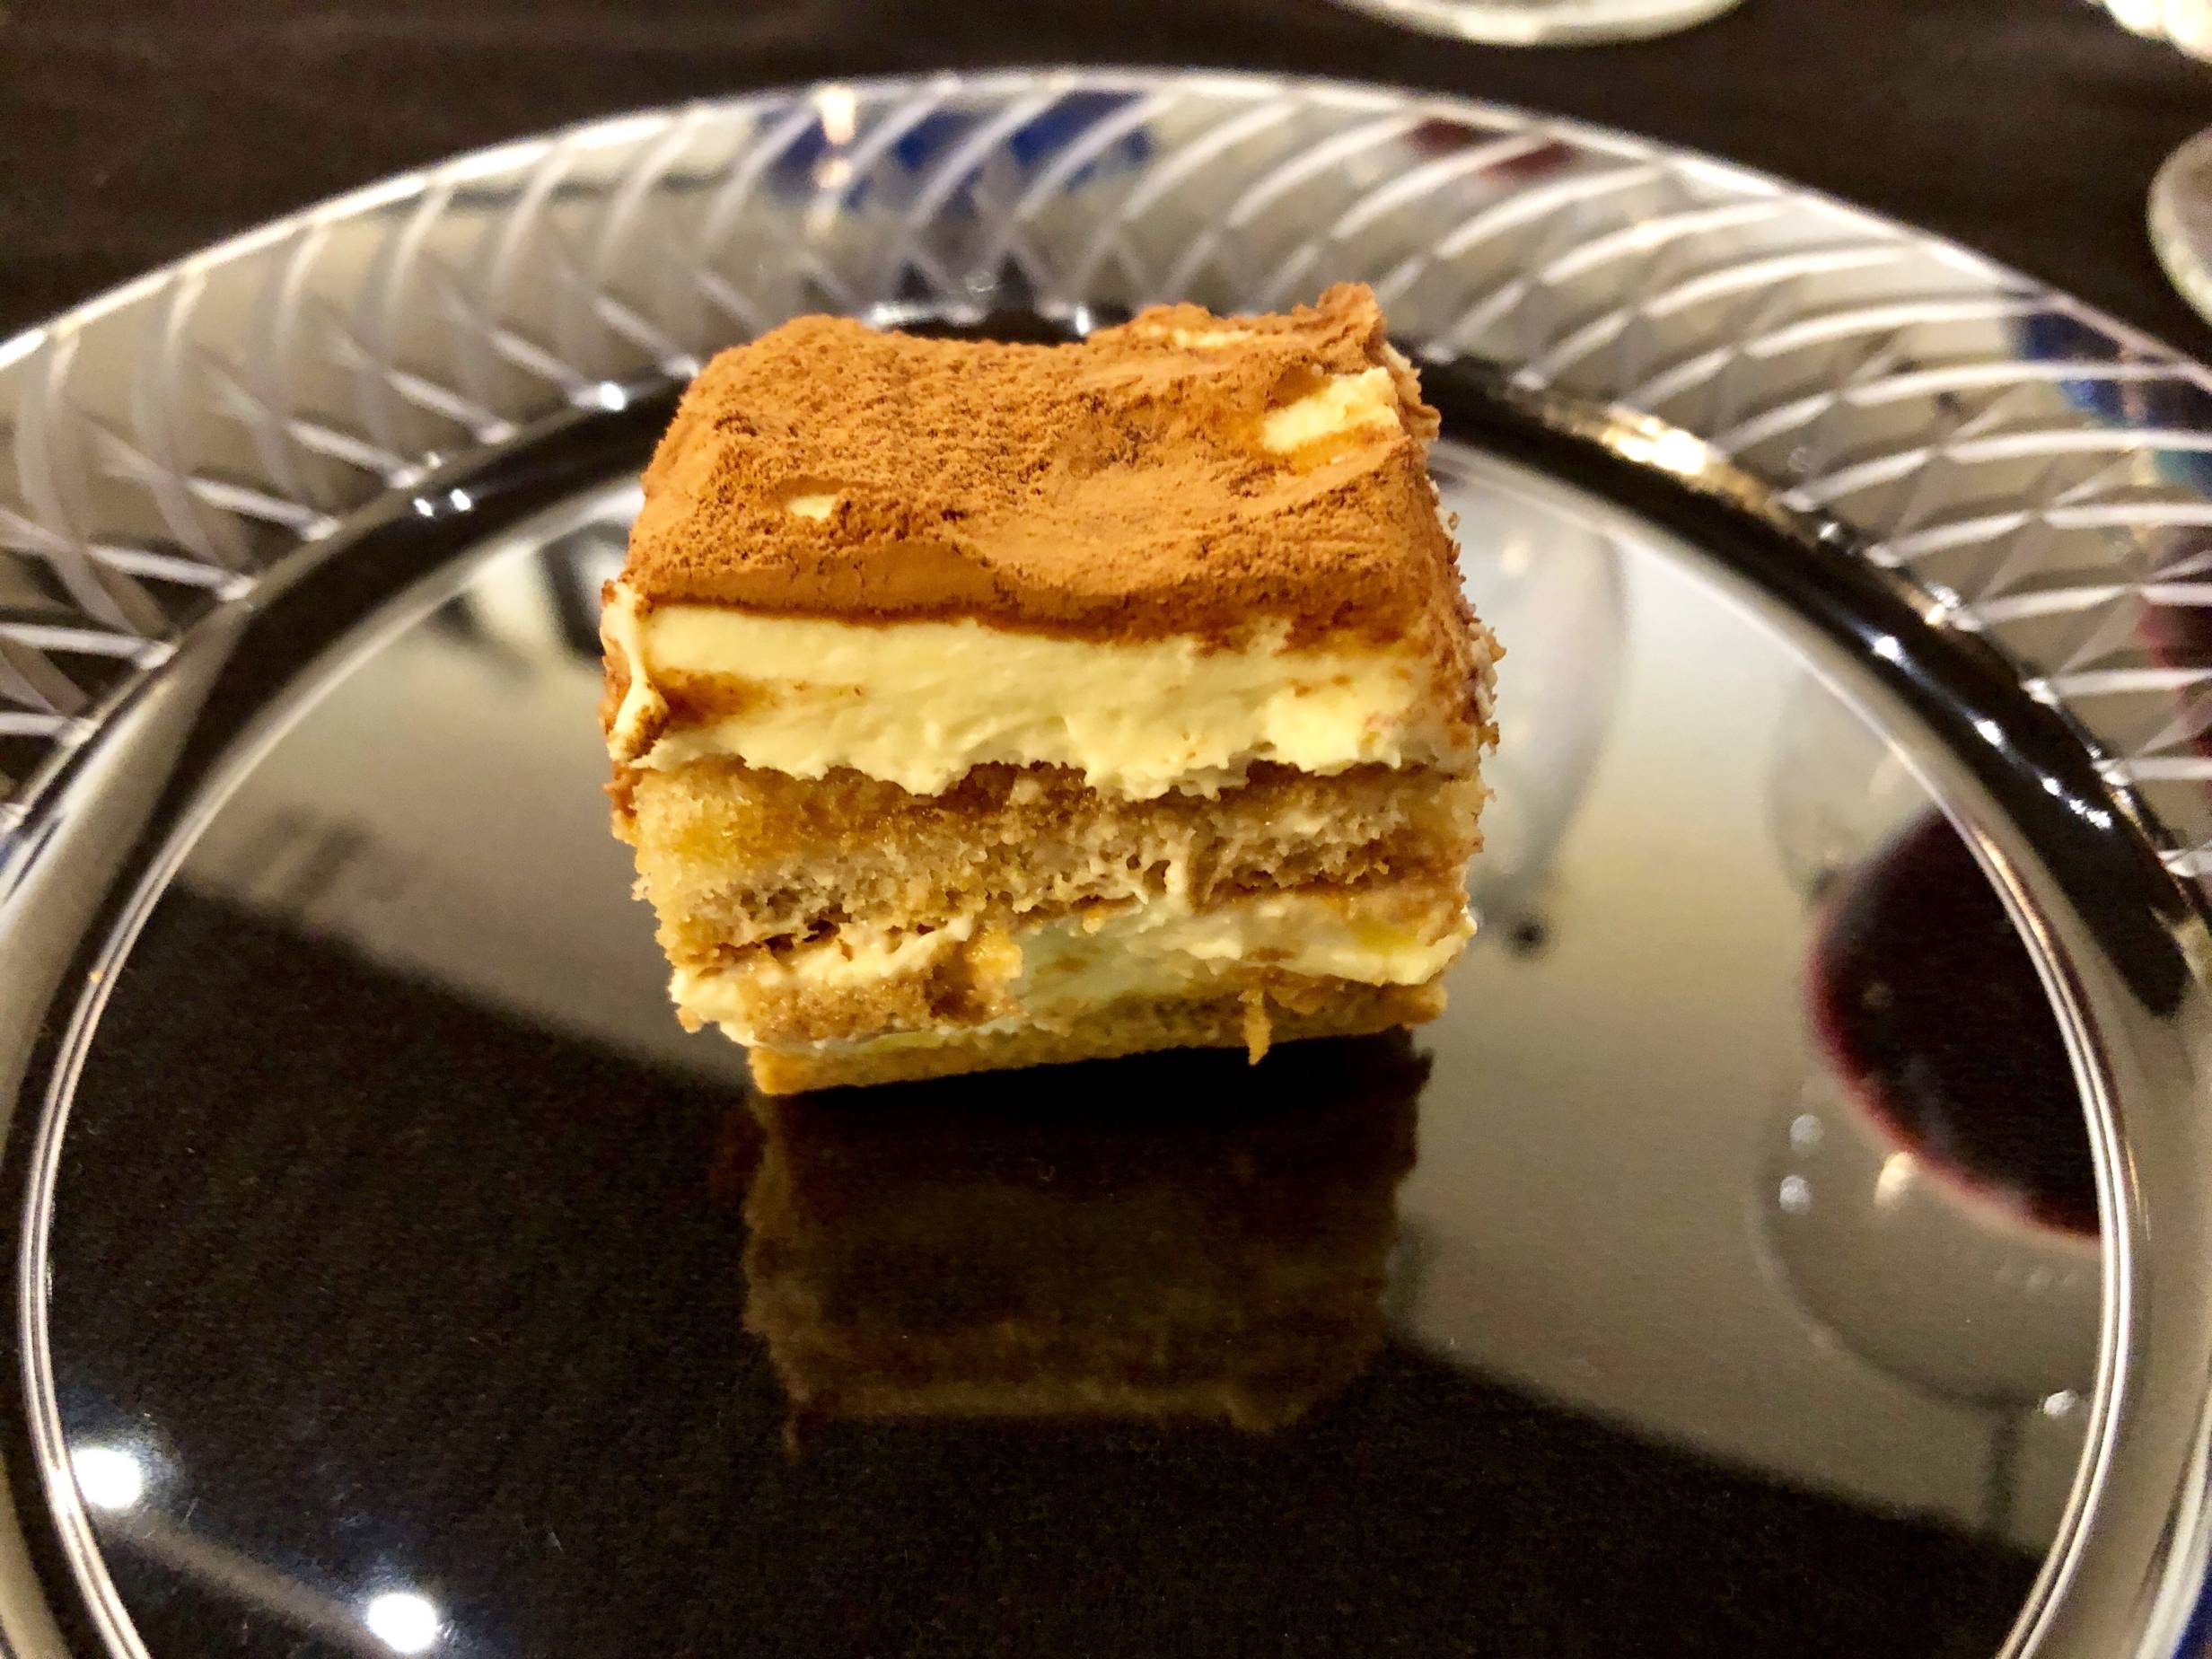 Image: A small slice of tiramisu sits on a round, clear plate on a black tablecloth-covered table. The tiramisu is layers of coffee-soaked lady fingers, and cream-colored mascarpone cheese. The top of the tiramisu is dusted with cocoa powder. Photo by Rebecca Wells. 